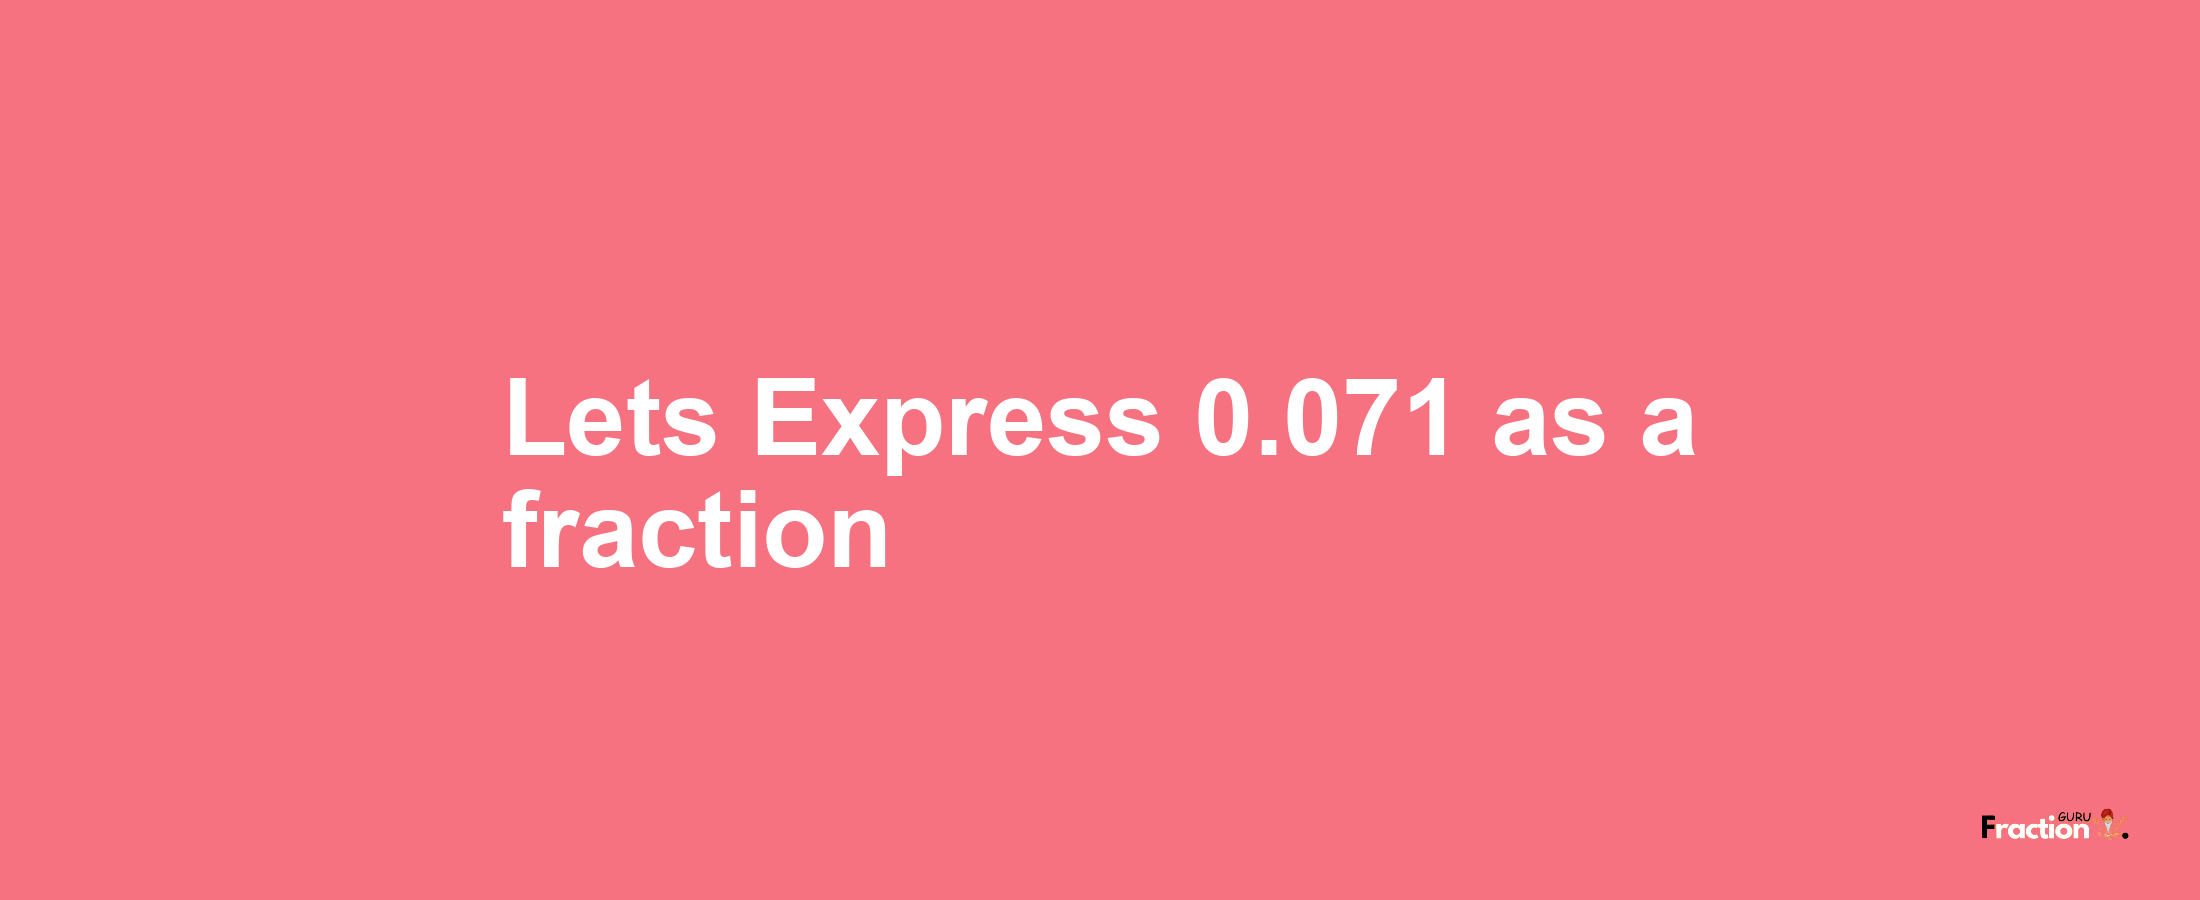 Lets Express 0.071 as afraction